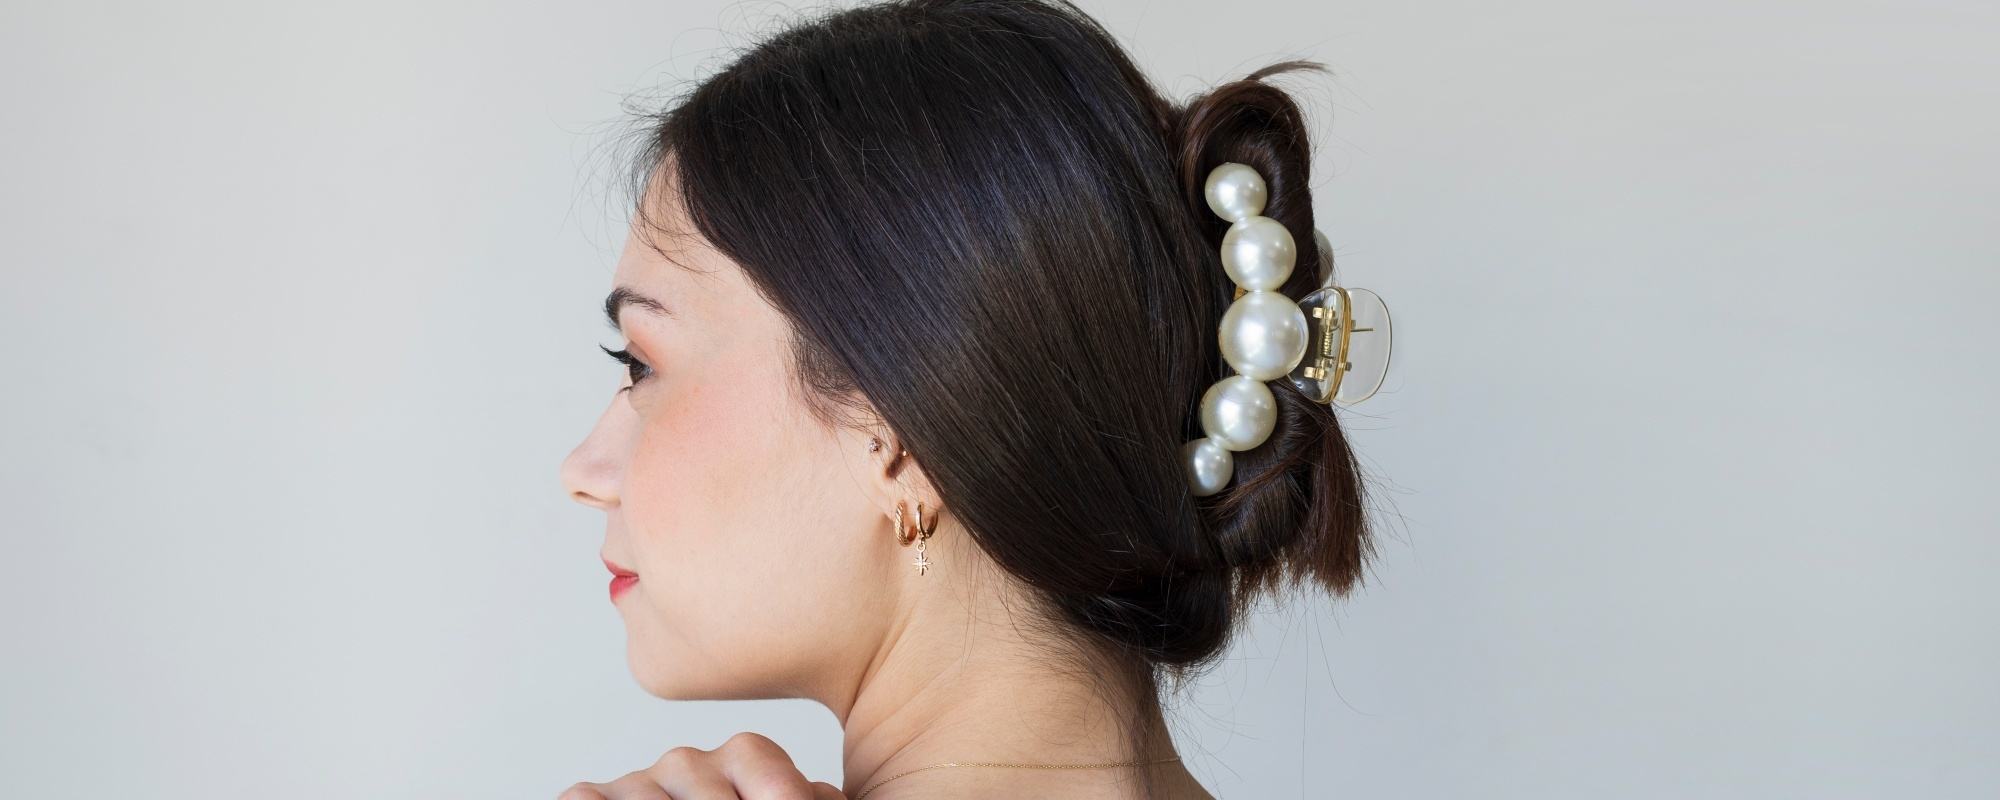 Hair Clips for Women: 30 Looks to Try Now